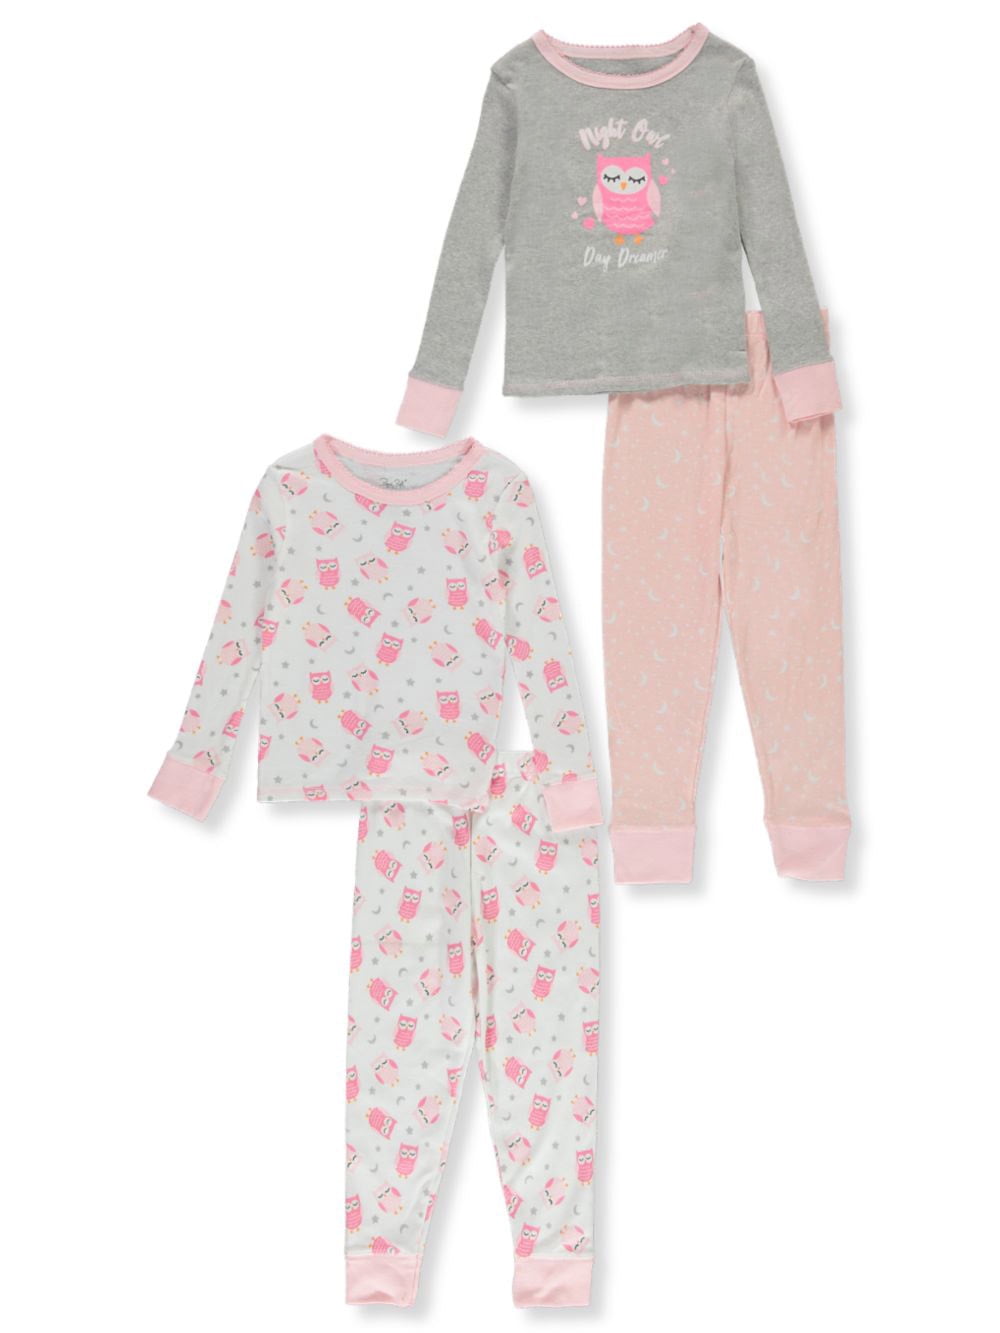 Details about   HELLO KITTY GIRLS 2 PIECE LONG SLEEVE/LONG PANT PAJAMA SET pink/multicolor 